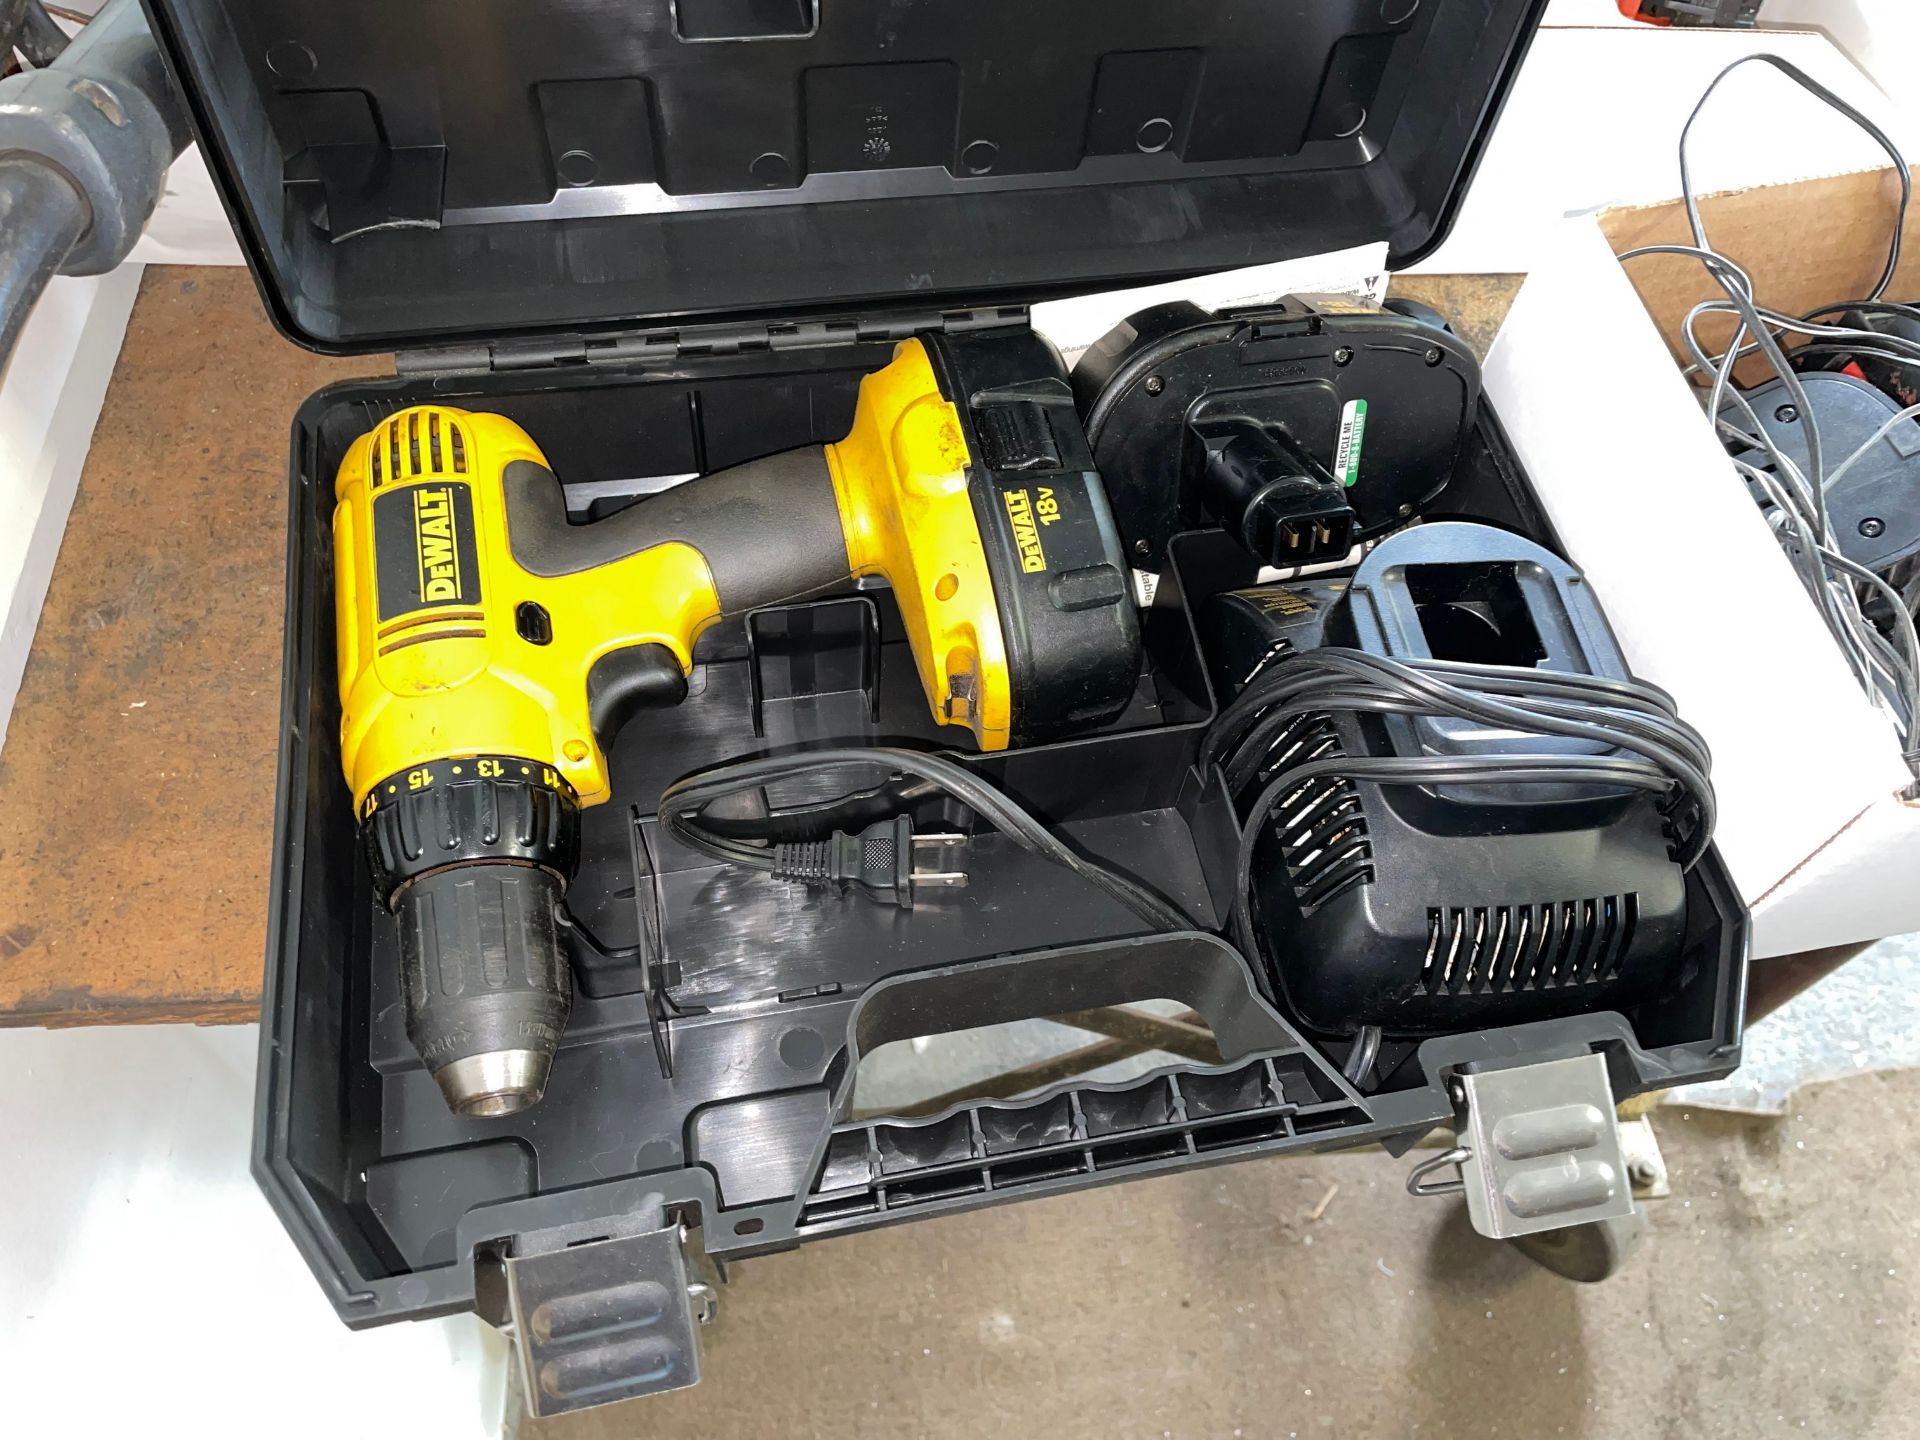 DeWalt 18 Volt Battery Powered Drill with Charger